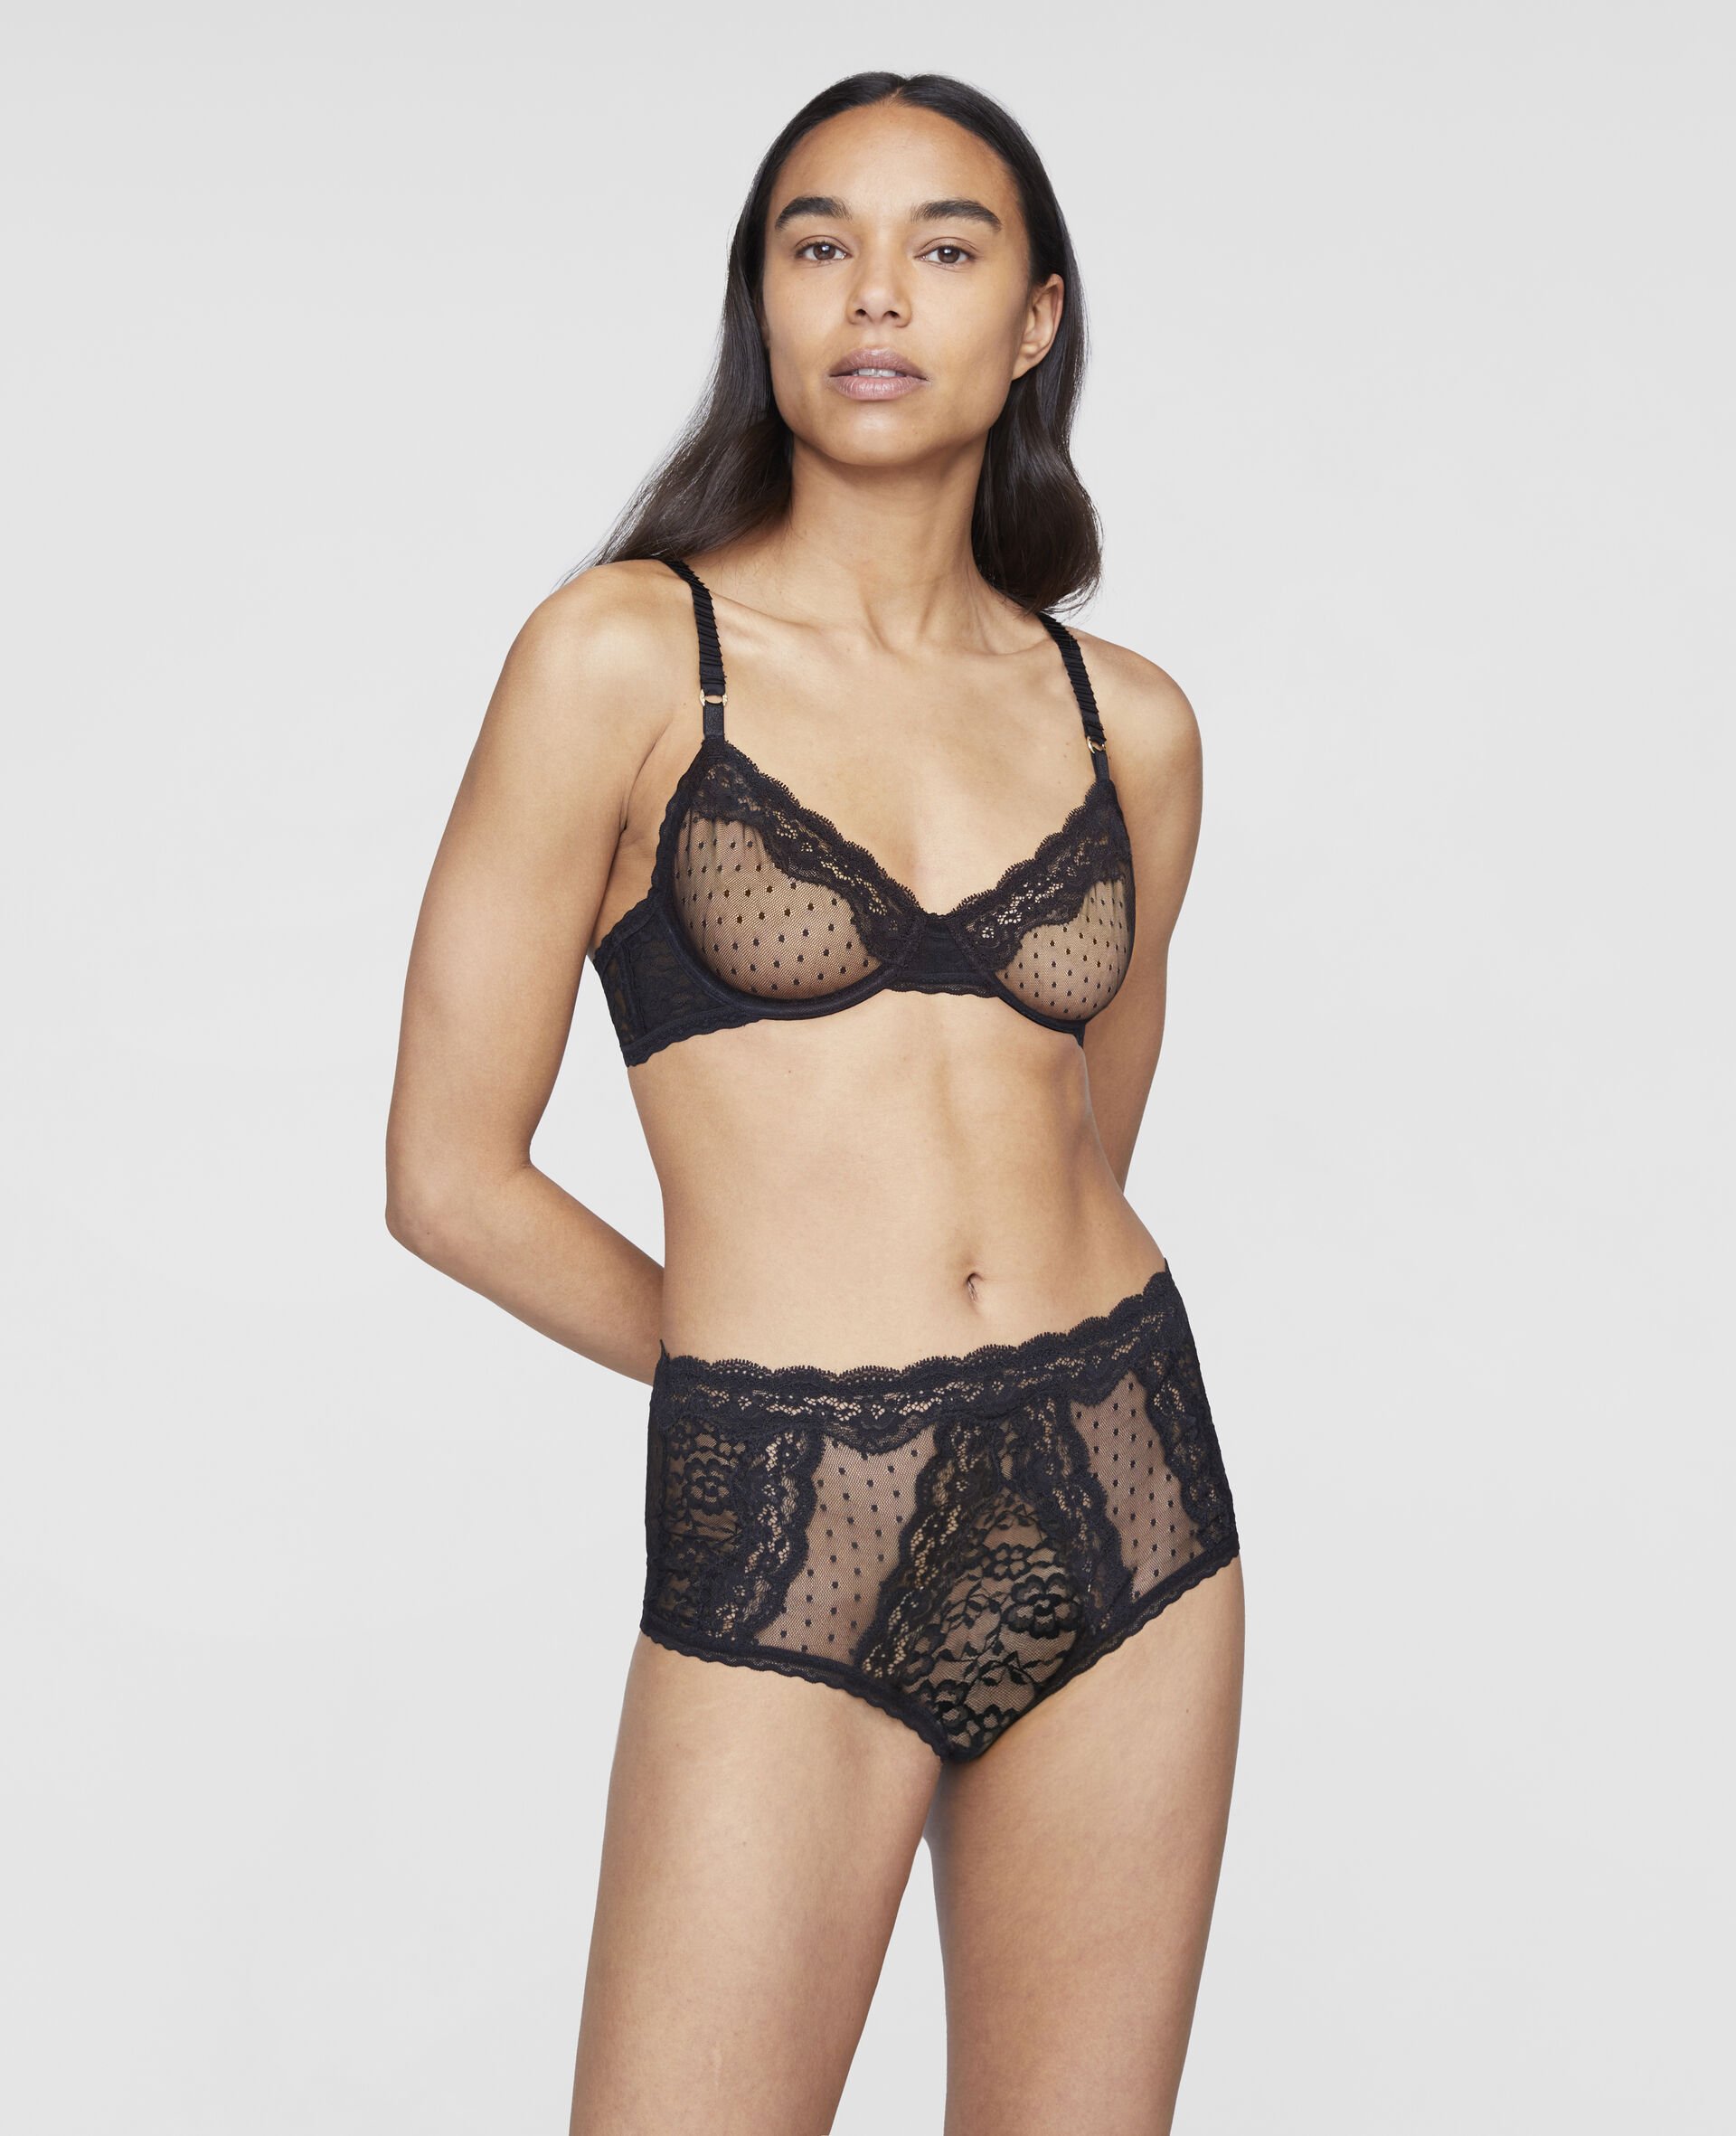 Sustainable underwear - top 10 brands for the most beautiful eco lingerie